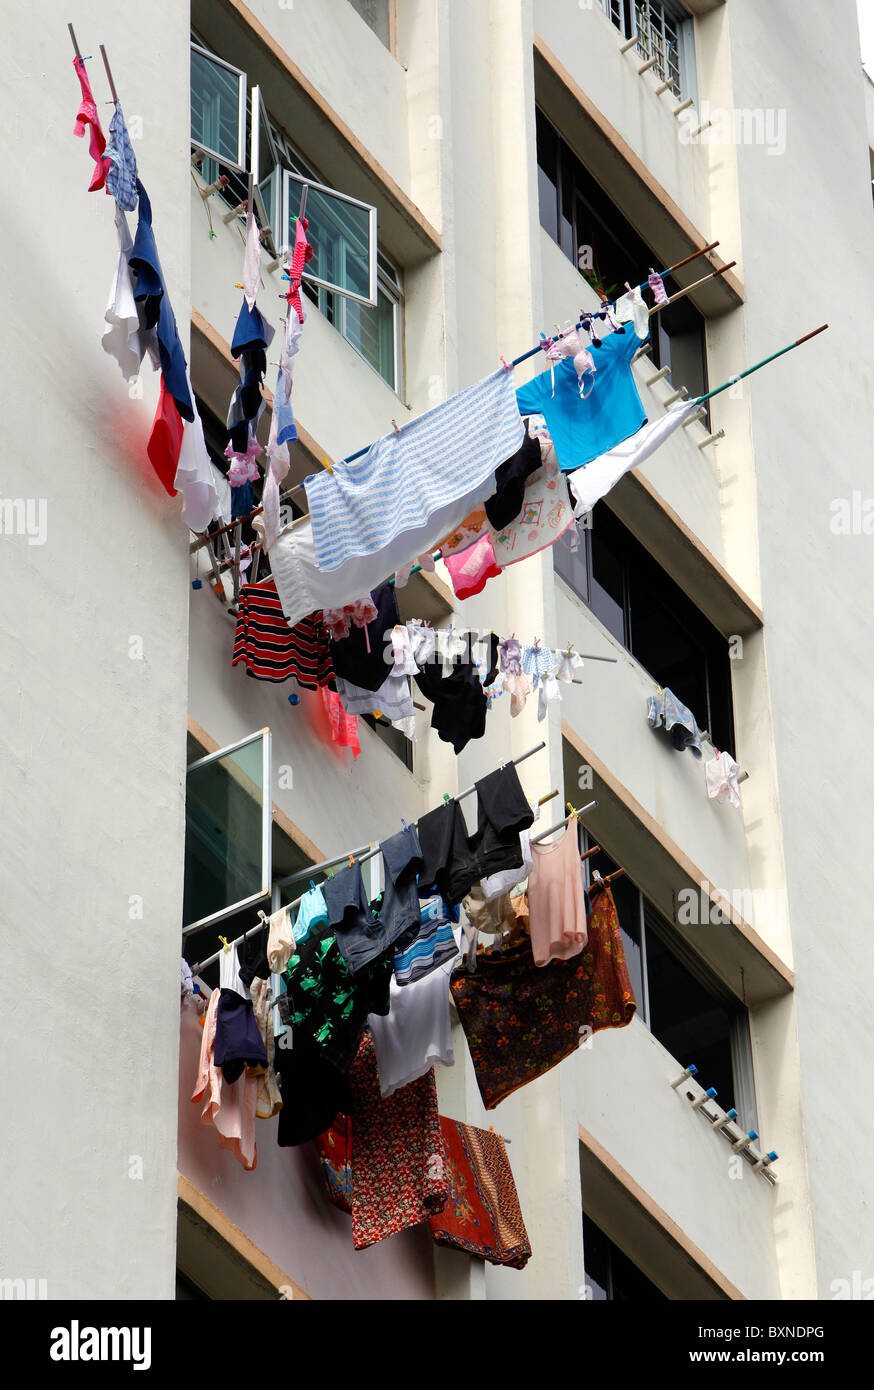 Singapore, the washing is hung out of the window to dry on a stick Stock Photo